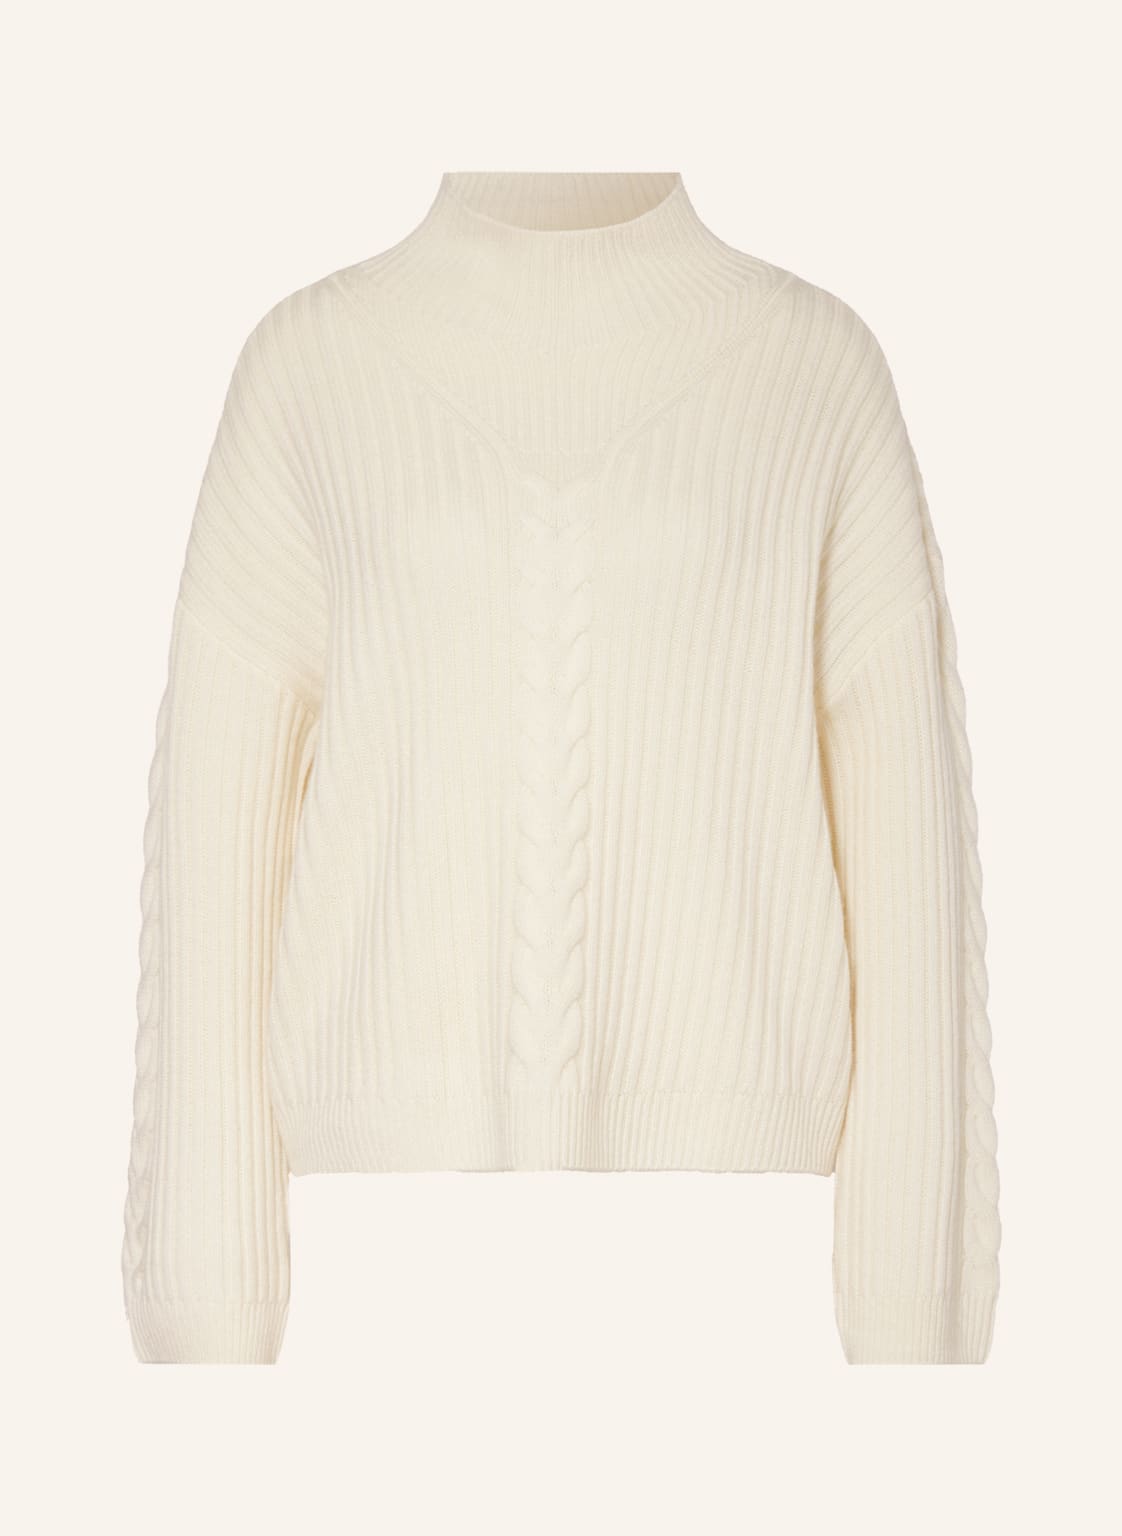 Repeat Pullover weiss von REPEAT